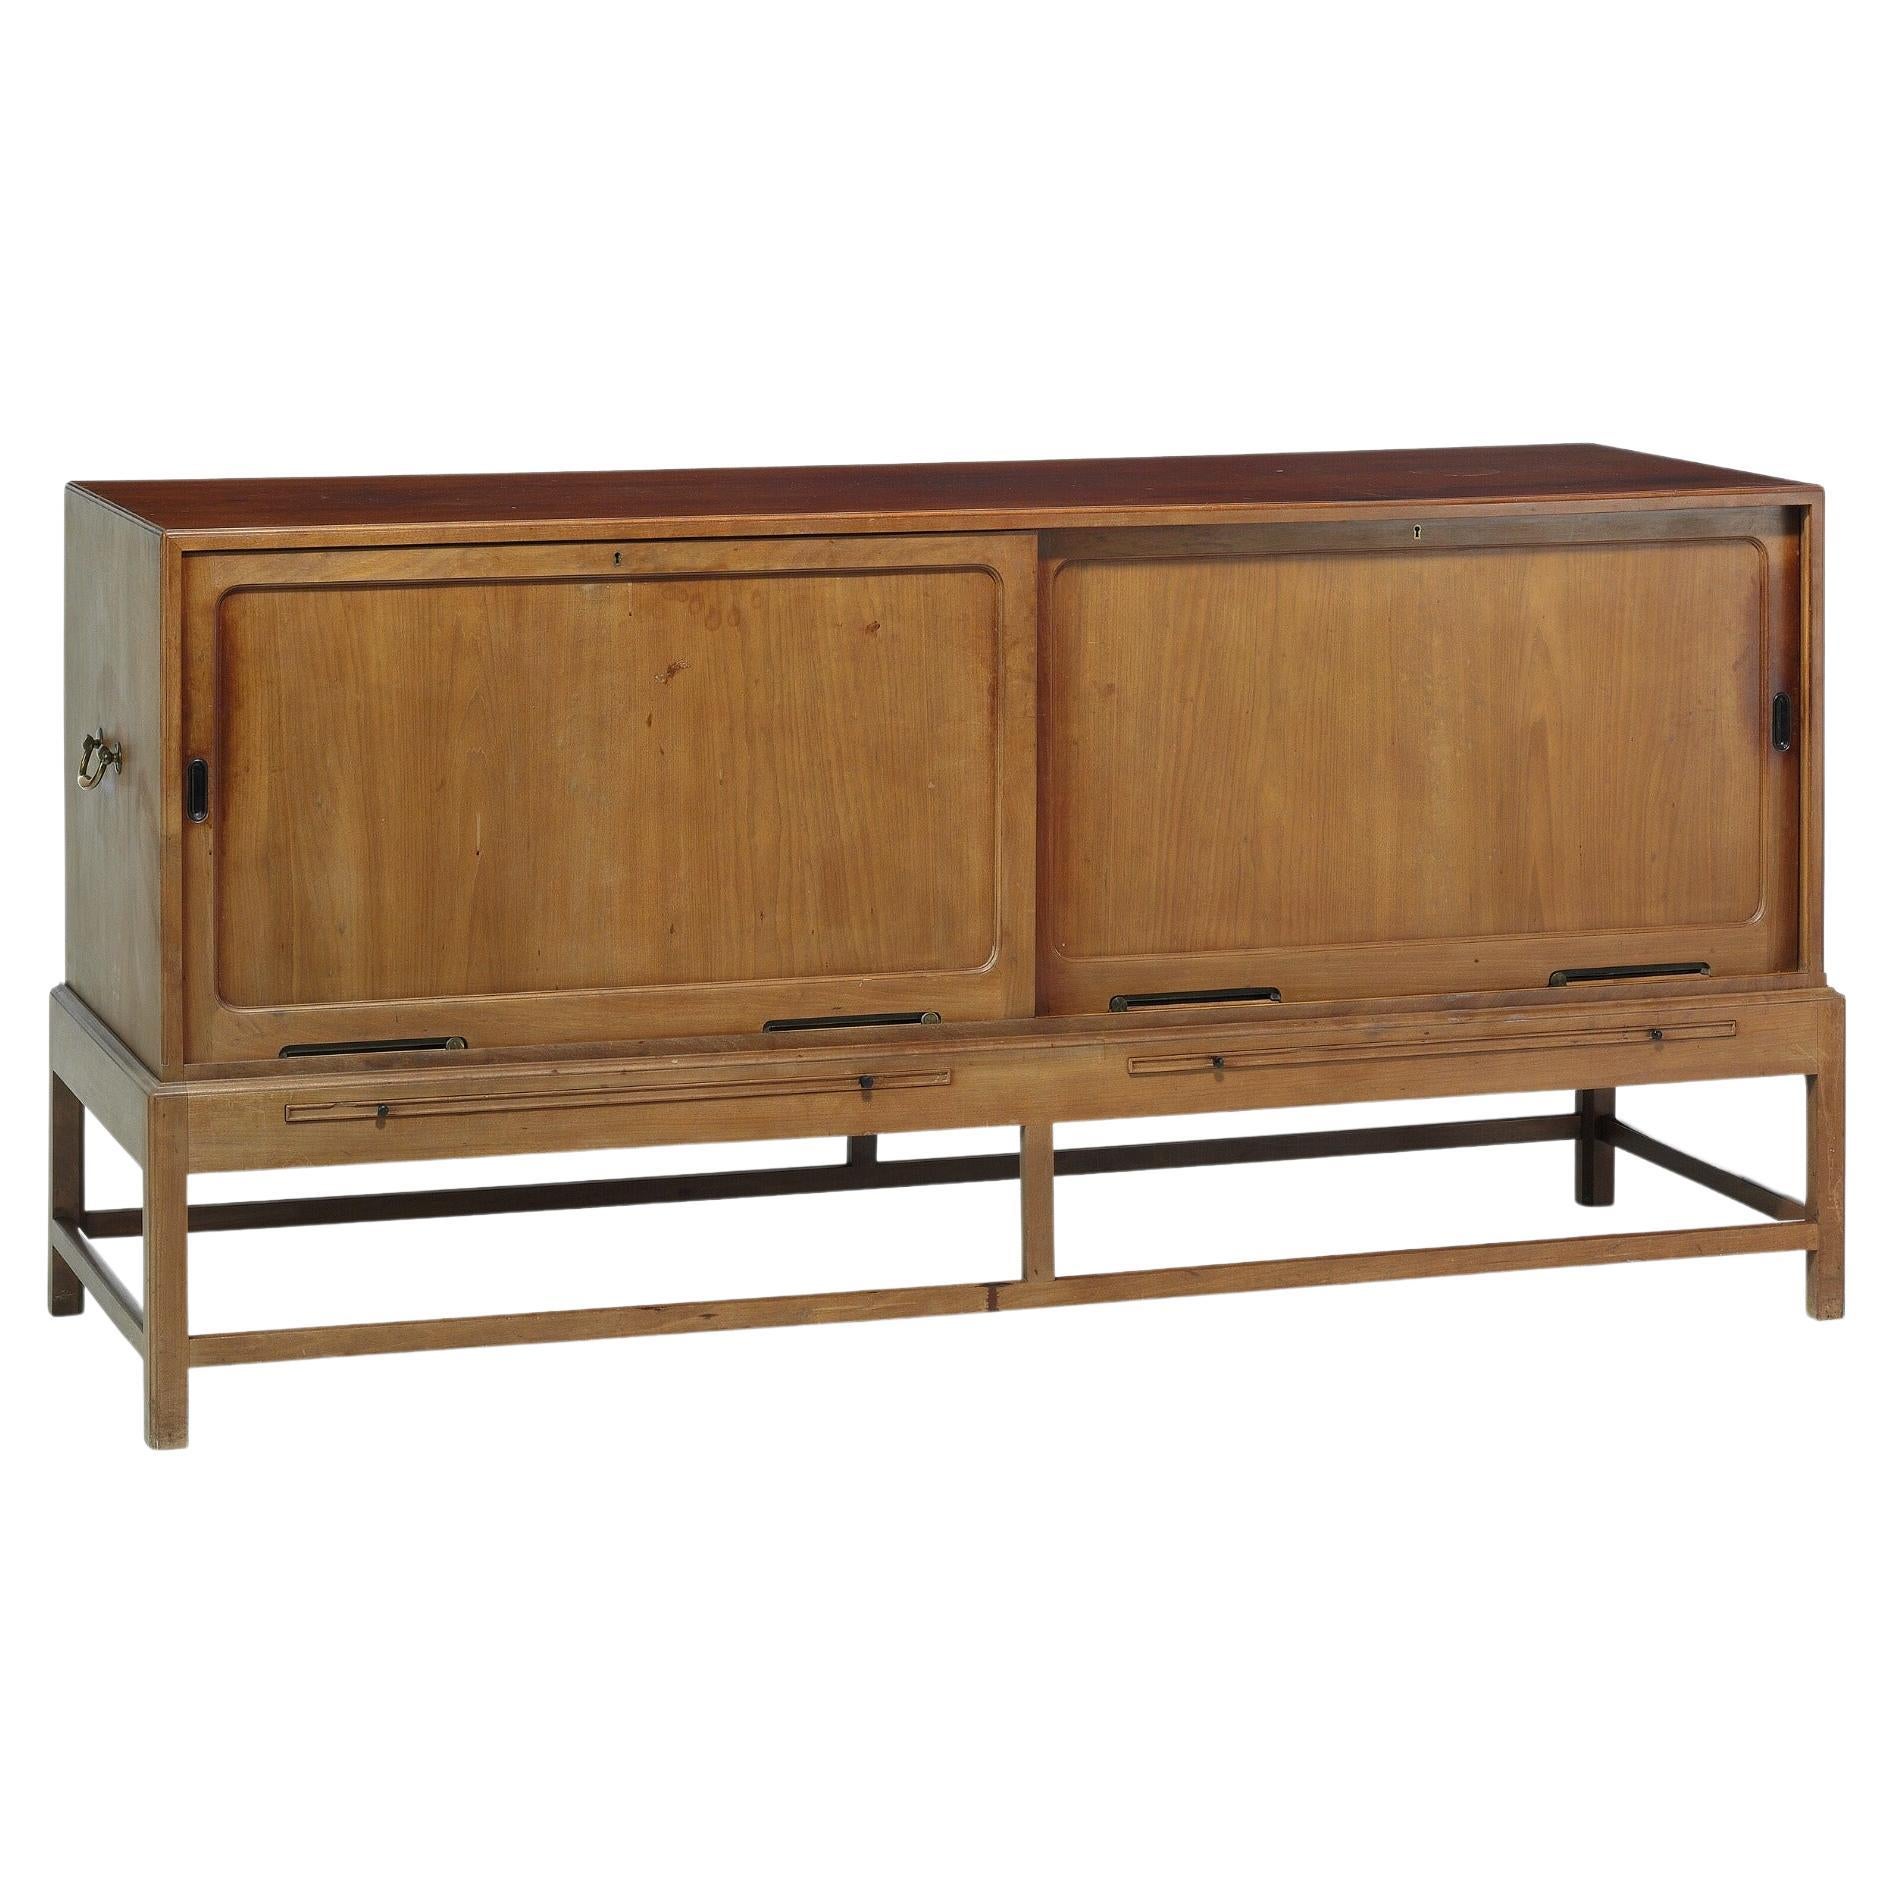 Kaare Klint Cuban Mahogany Sideboard Made Early 1930s with Wheel Runners For Sale